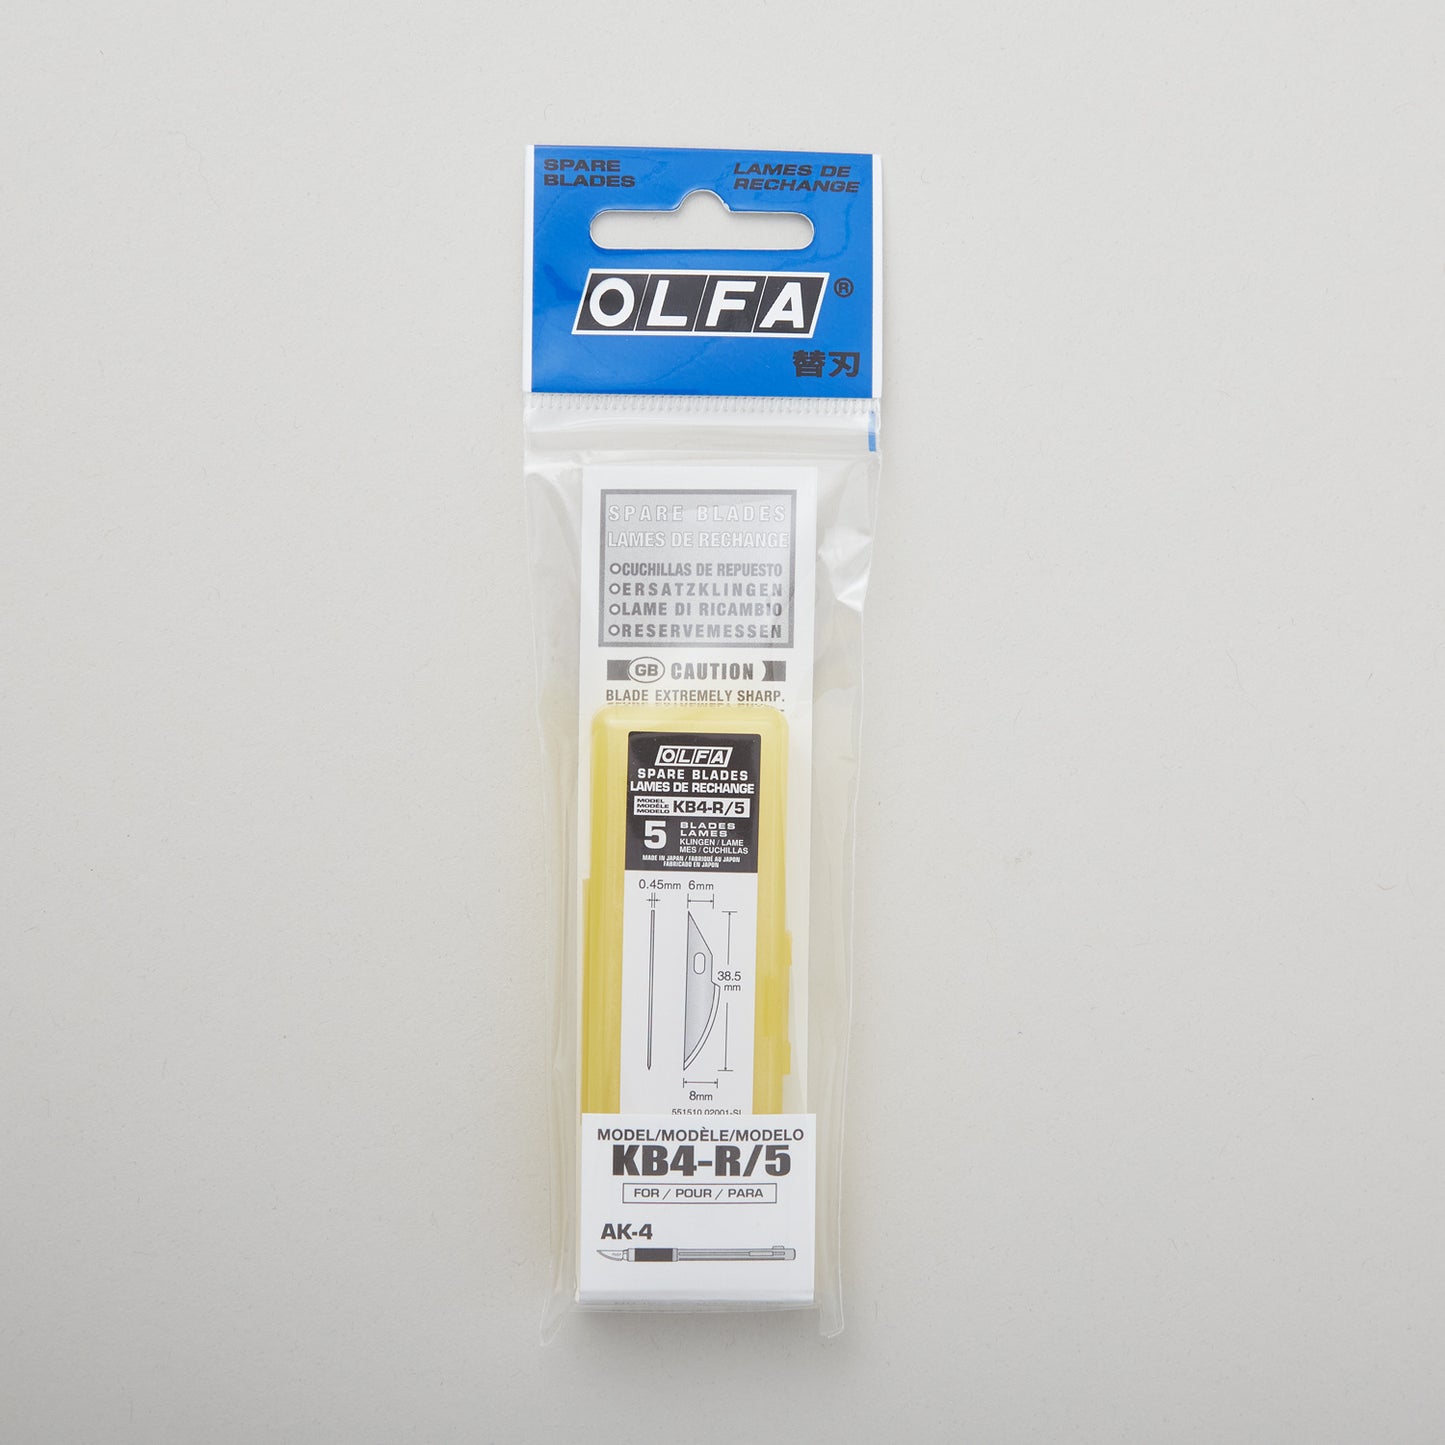 Olfa Curved Craft Knife Replacement Blades - 5 Pack Alternative View #2